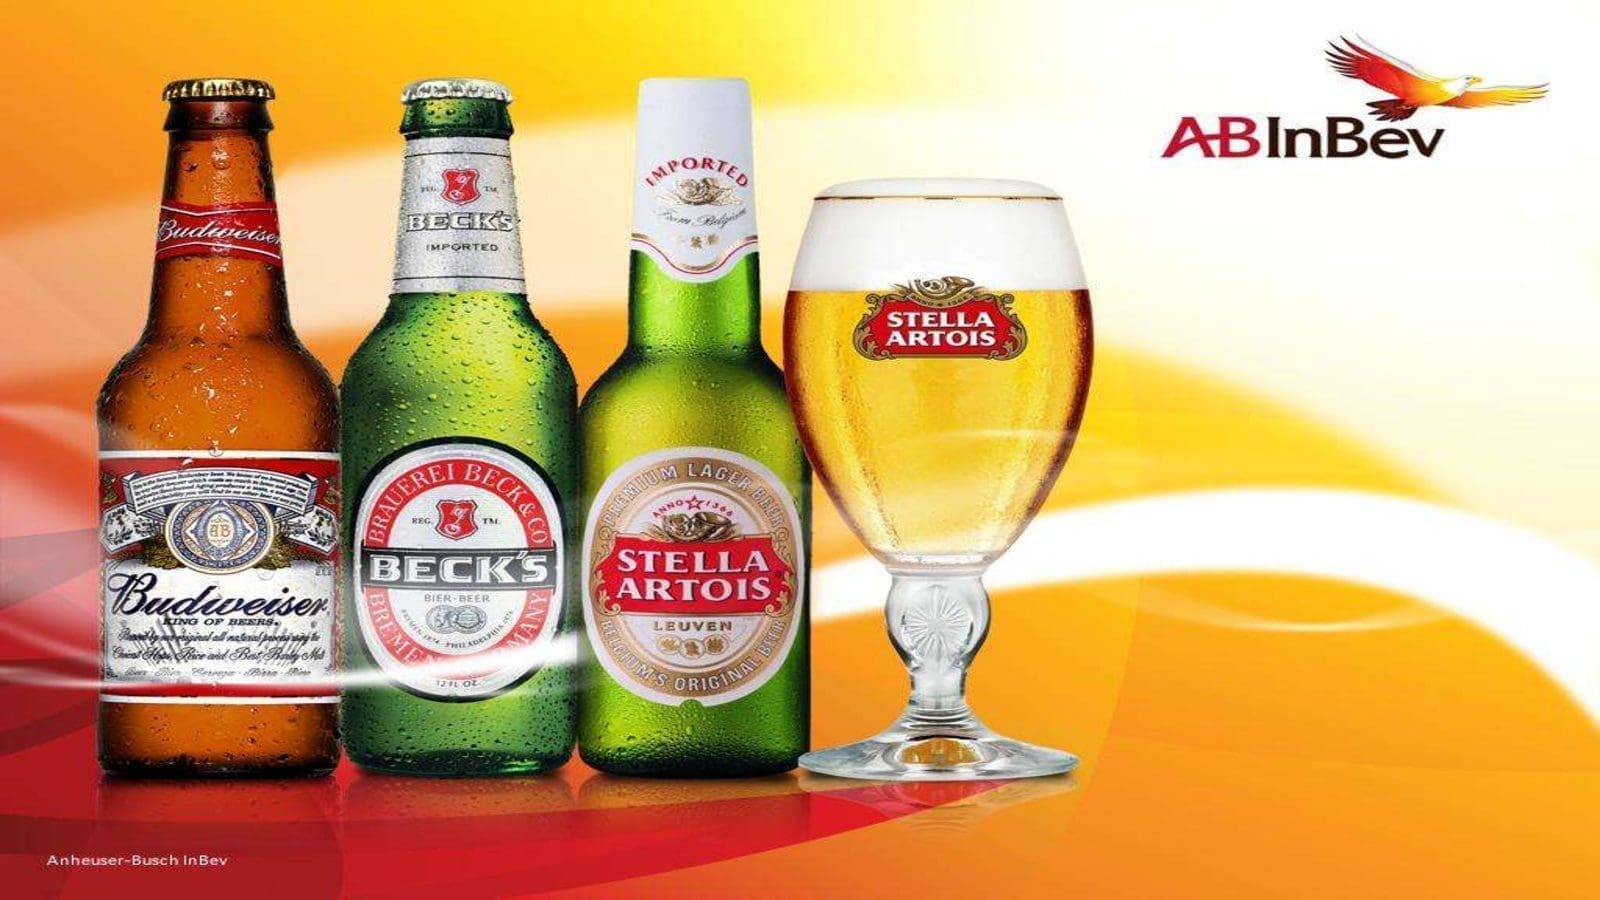 AB InBev reports mid-single digits revenue growth in South Africa